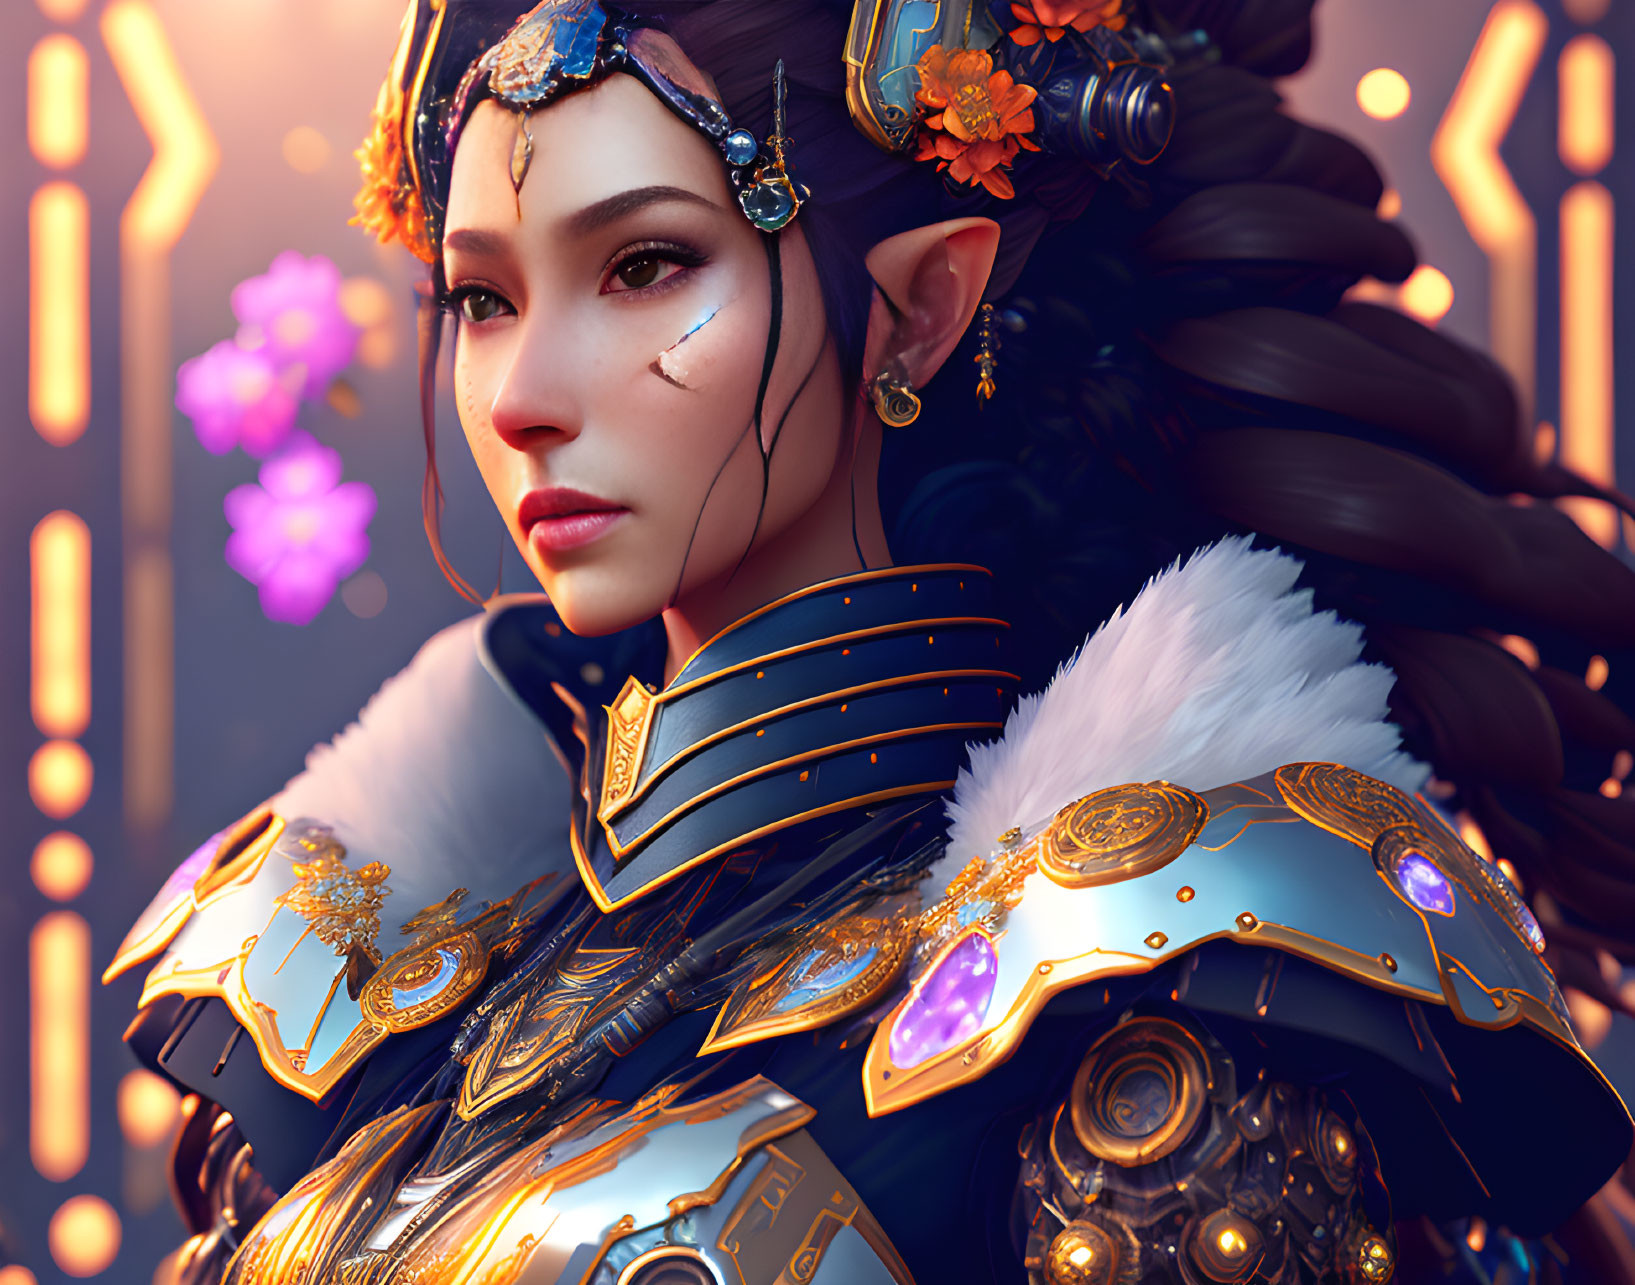 Digital portrait of woman in golden armor with purple accents and floral hair accessories